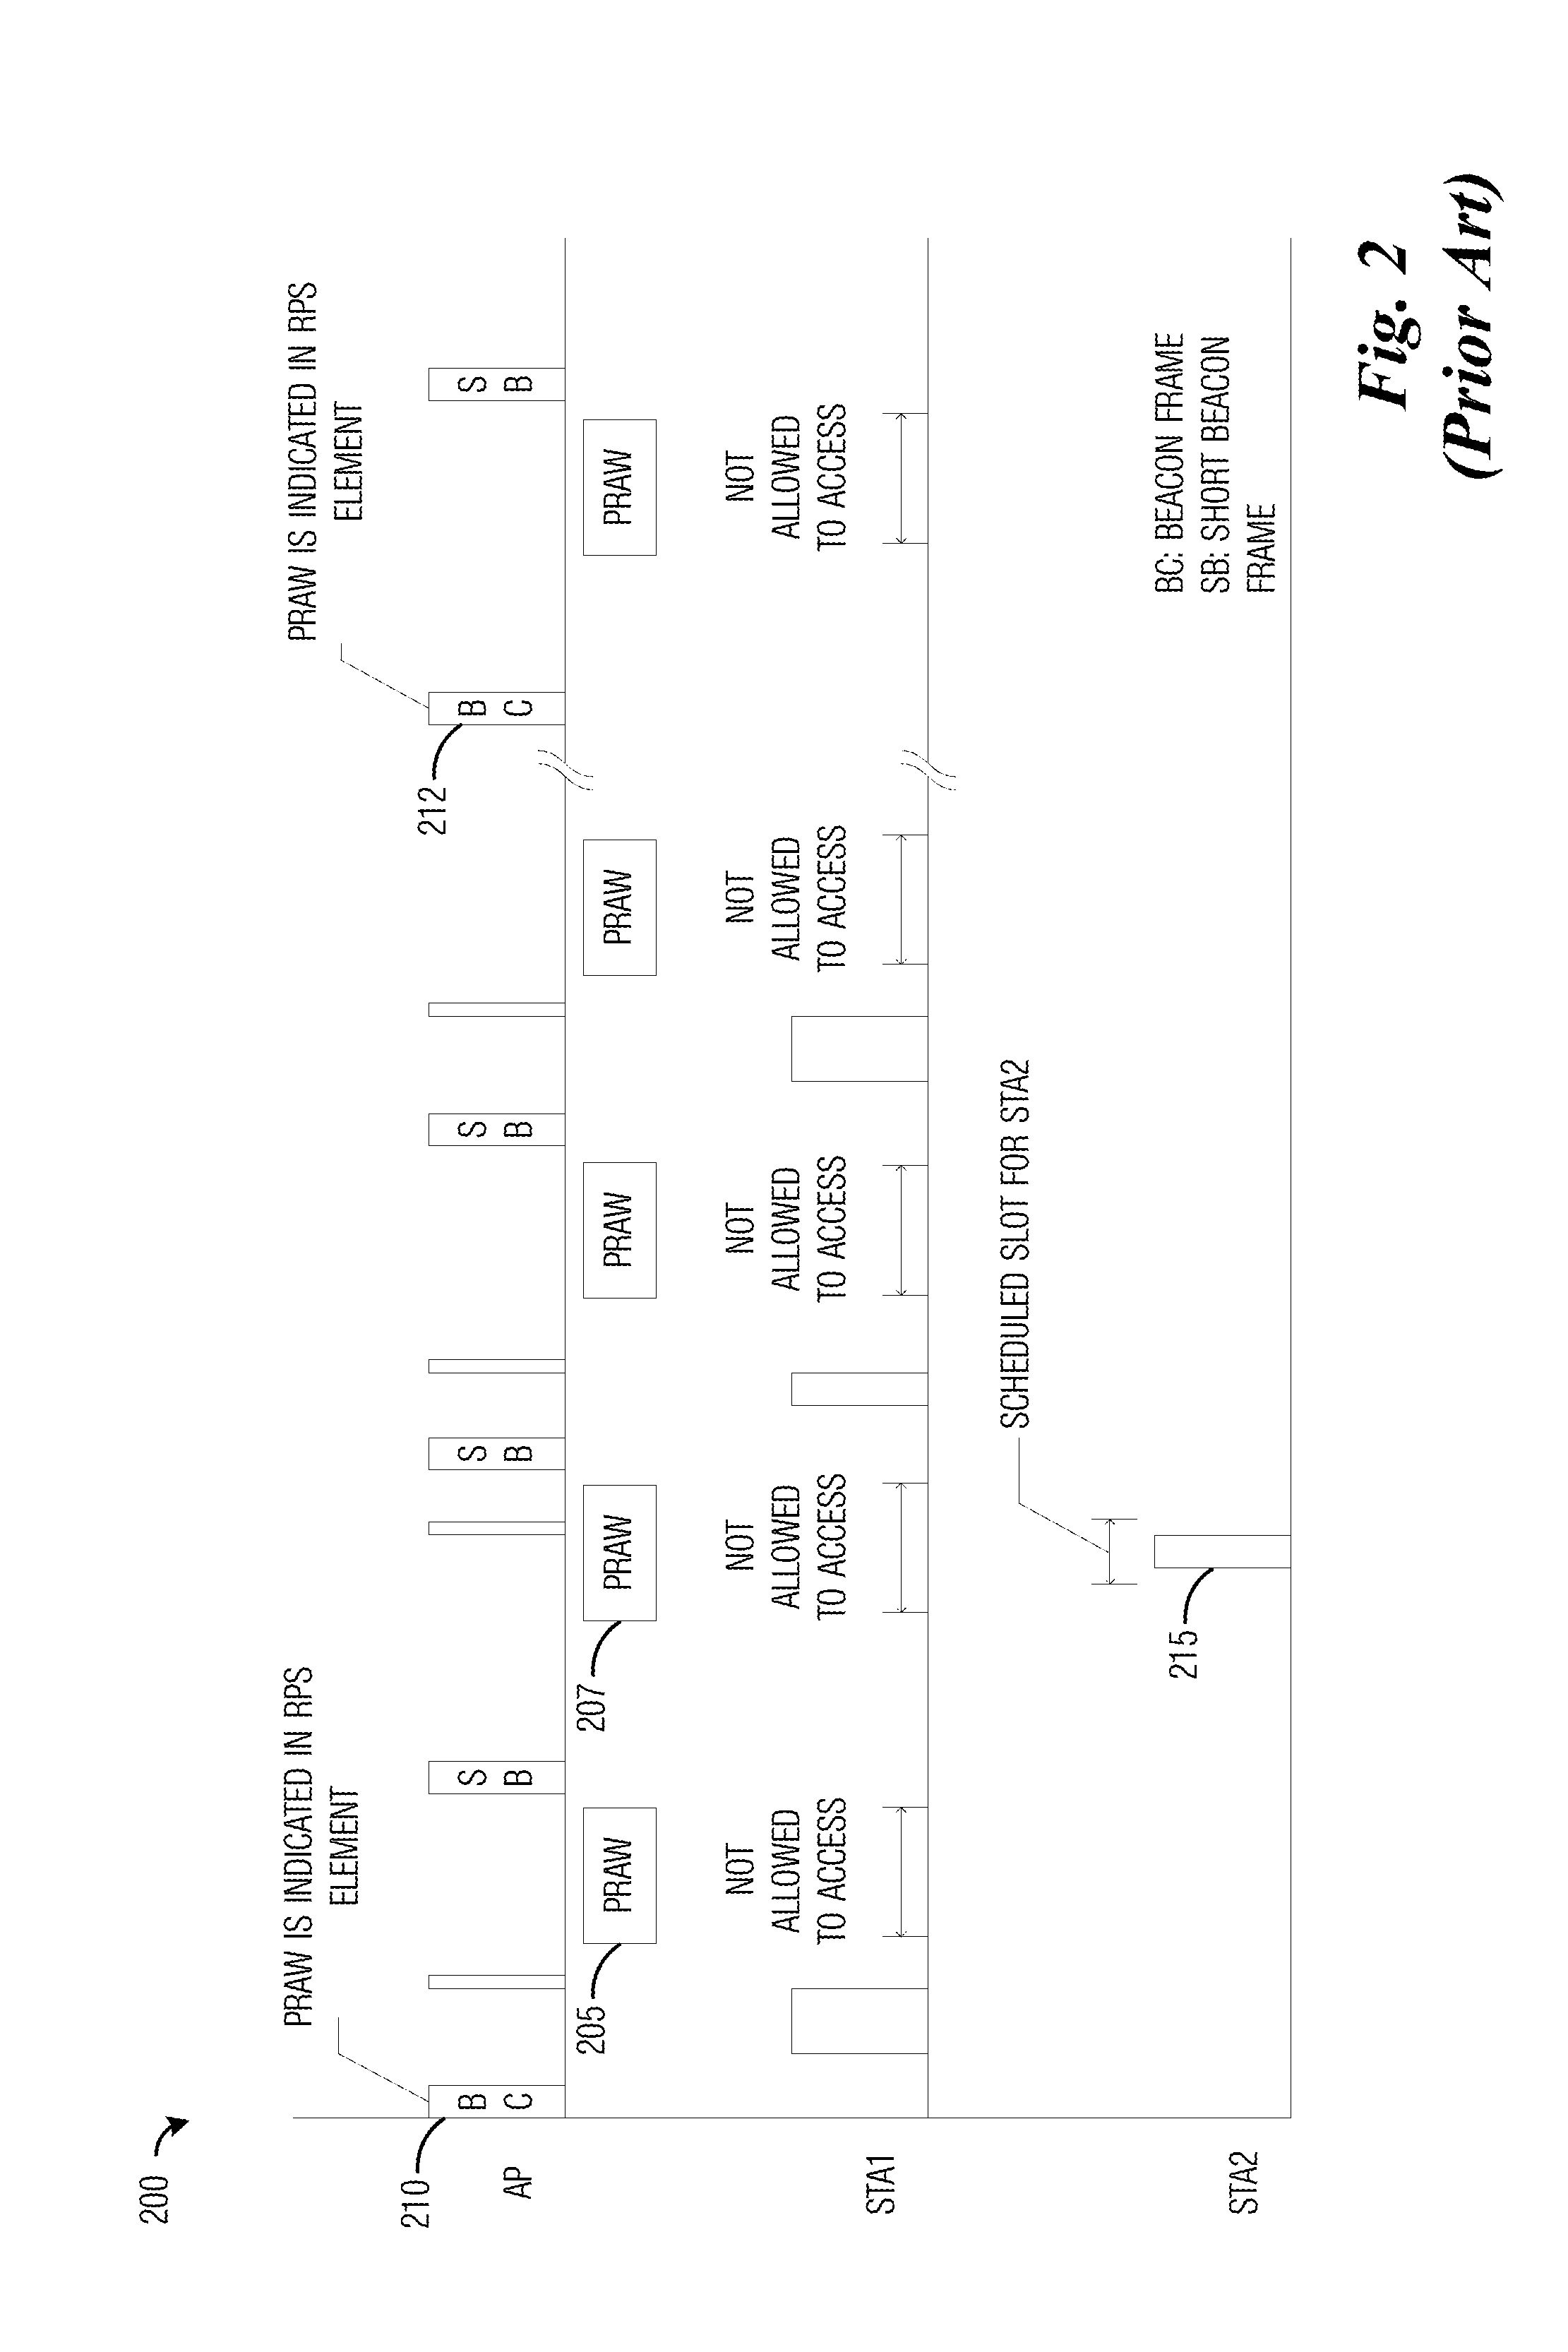 System and Method for Indicating a Periodic Resource Allocation